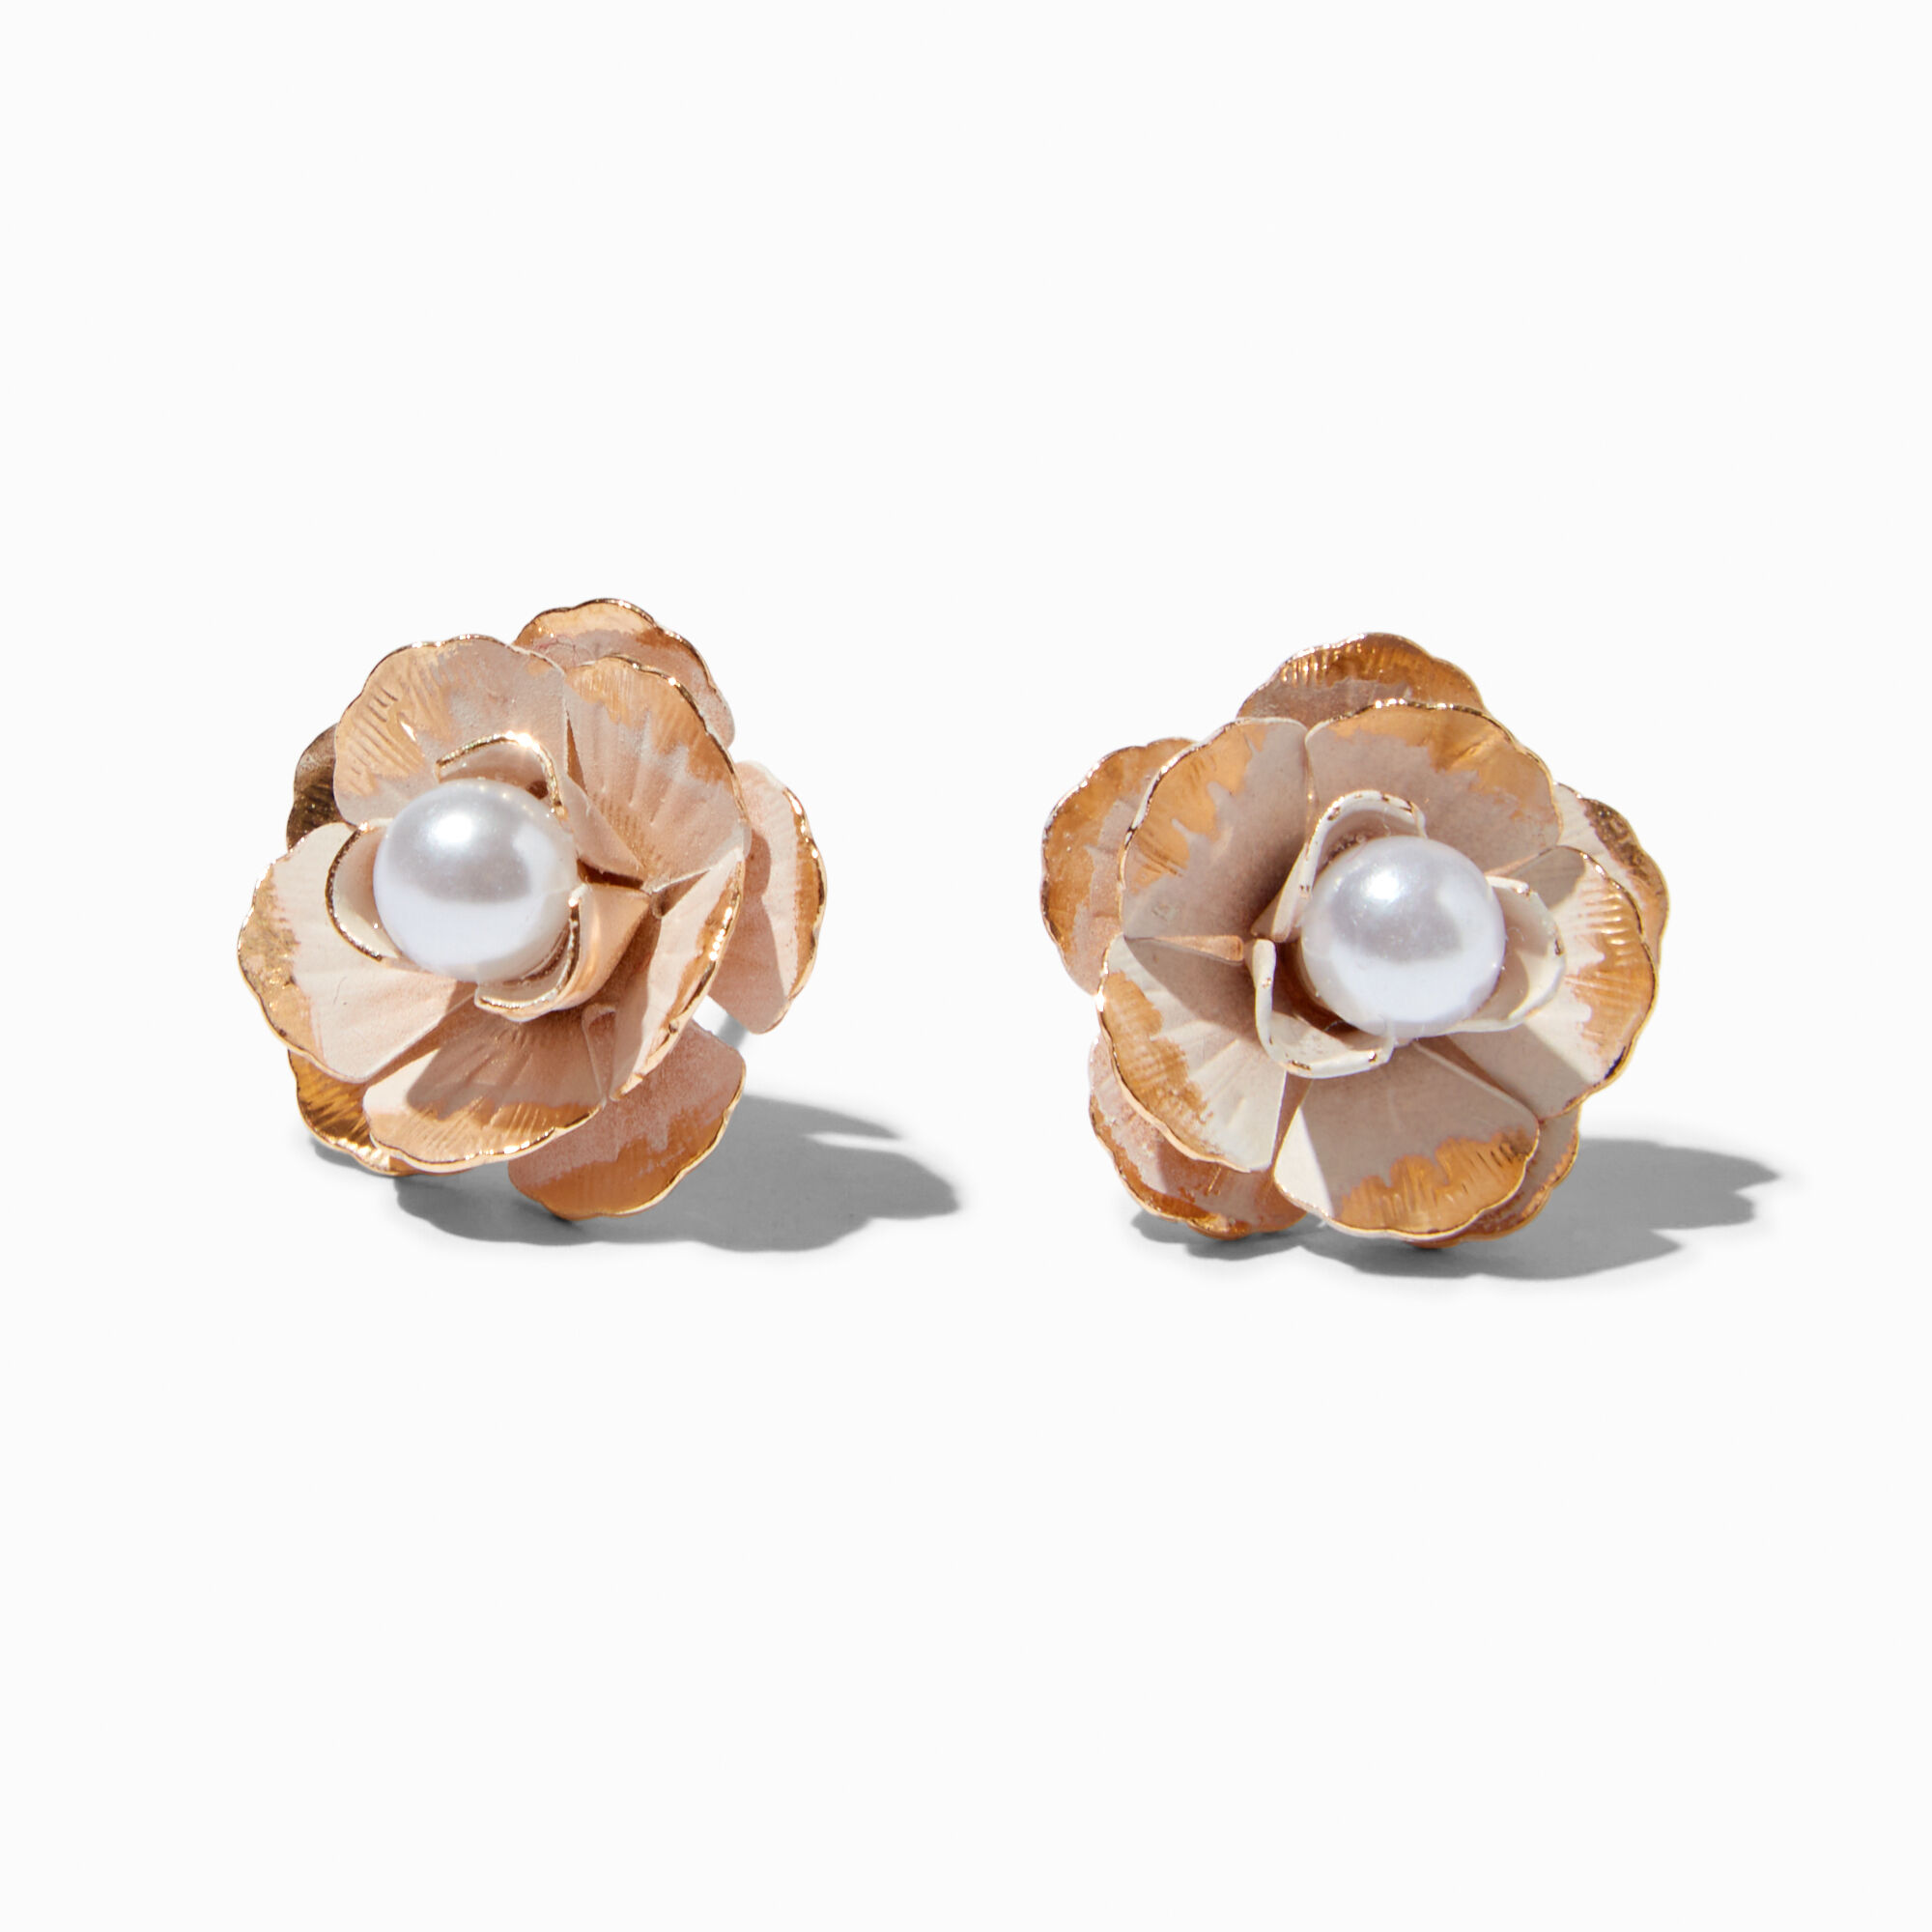 View Claires Sculpted Rose Pearl Stud Earrings Gold information